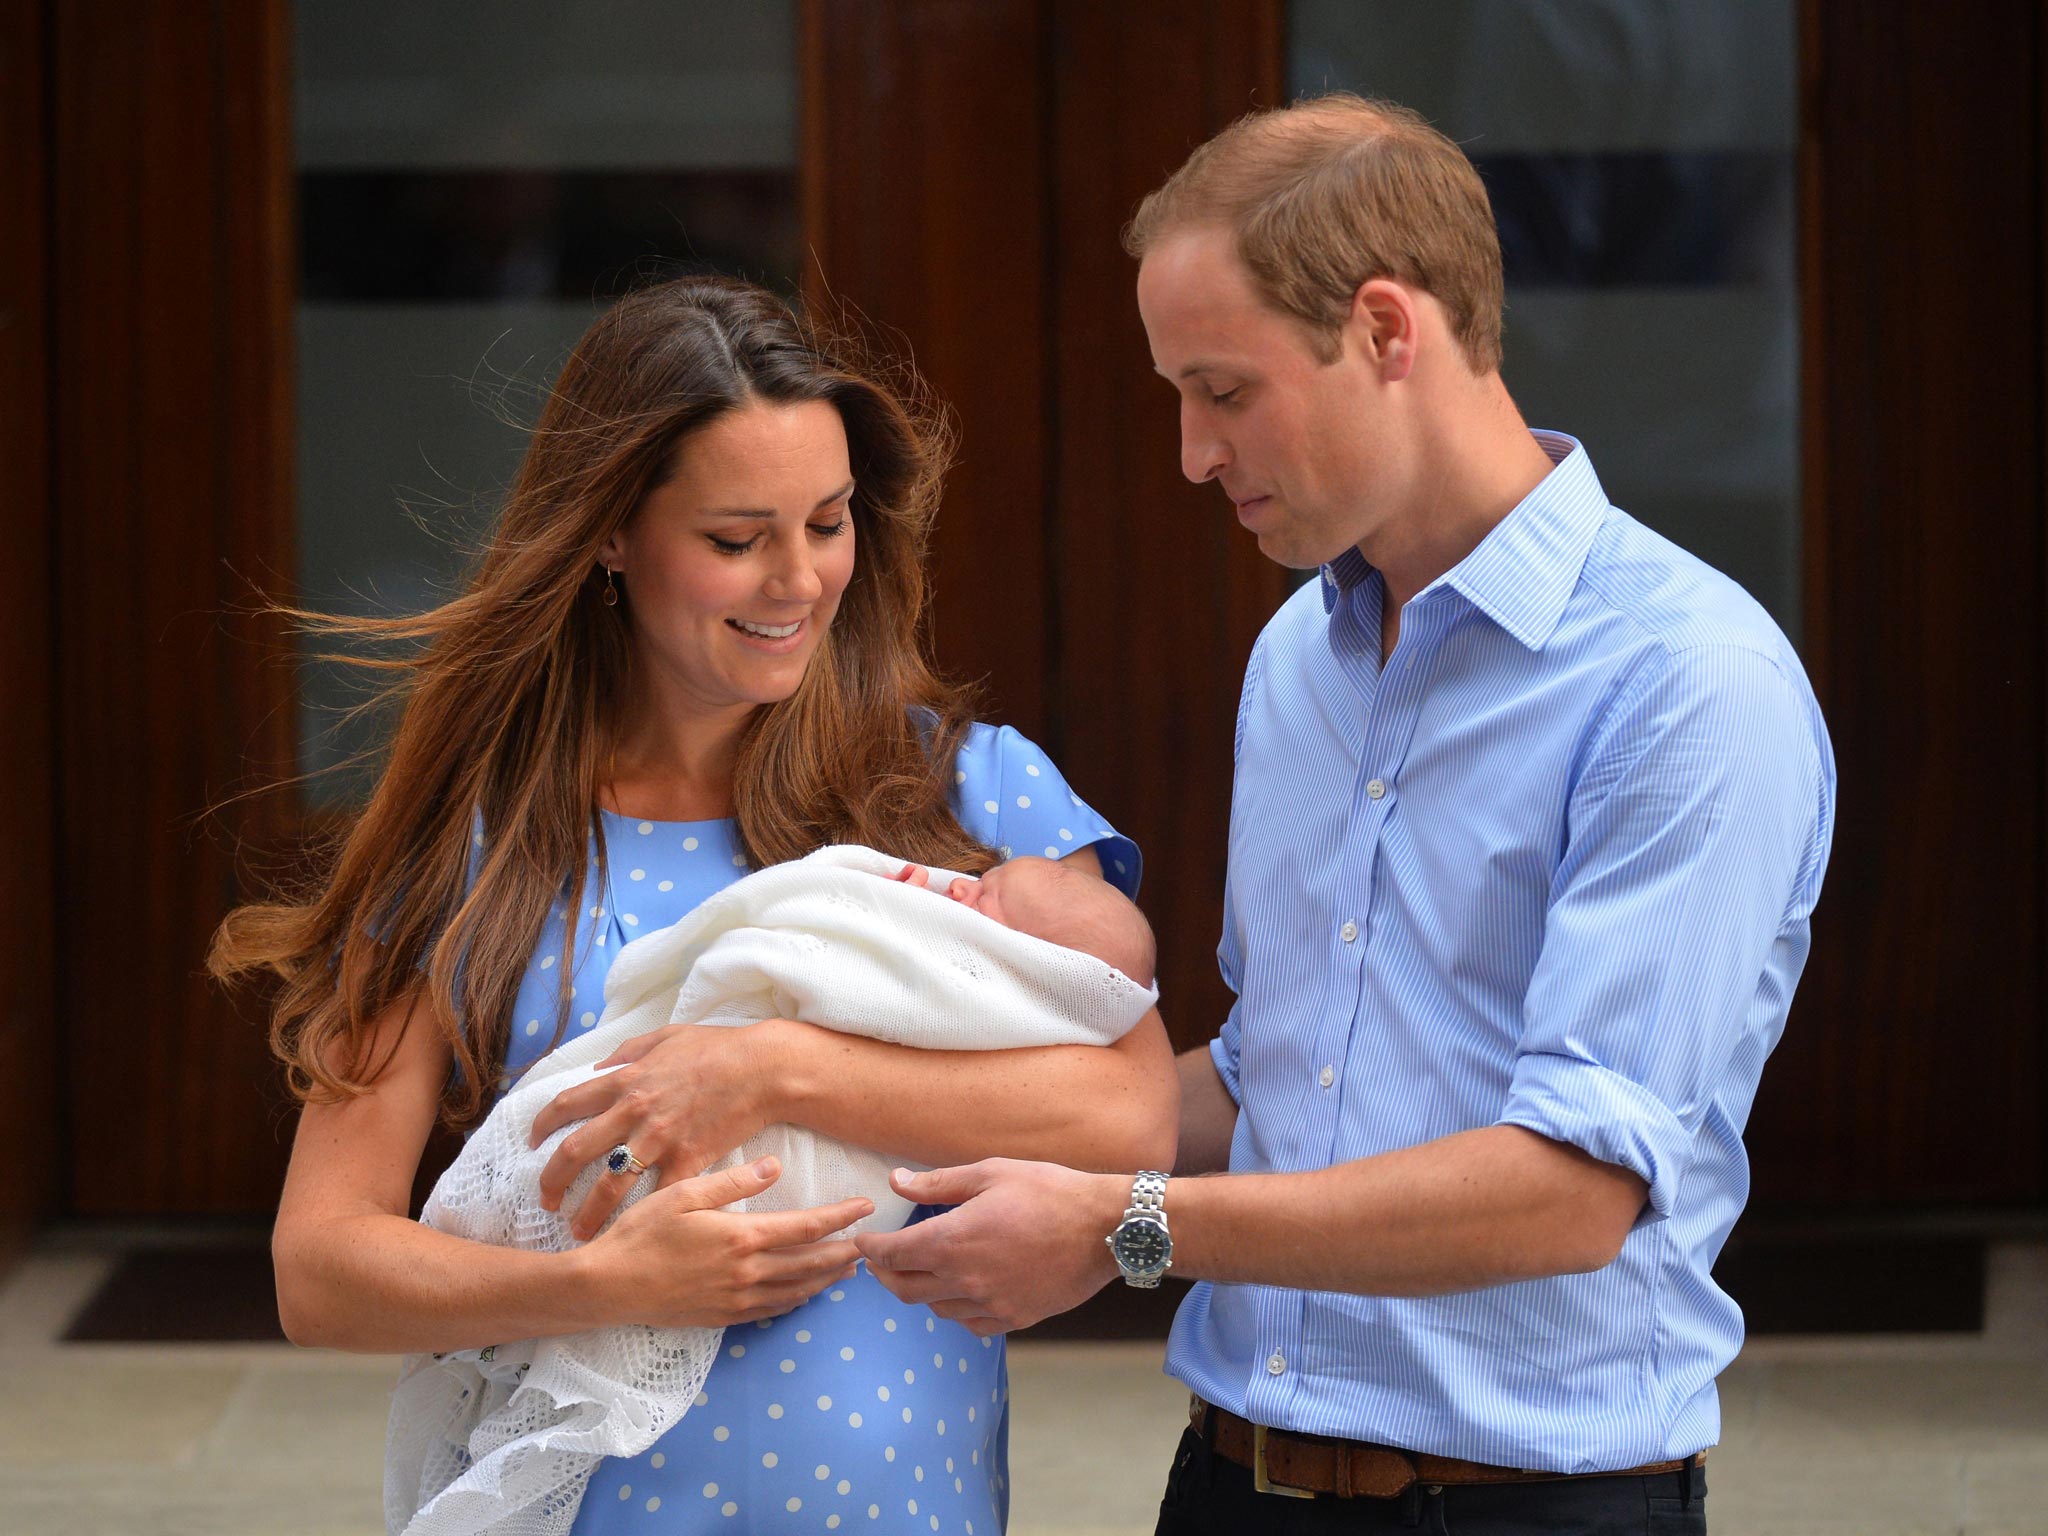 Prince William, Duke of Cambridge, and Catherine, Duchess of Cambridge show their new-born baby boy, Prince George of Cambridge